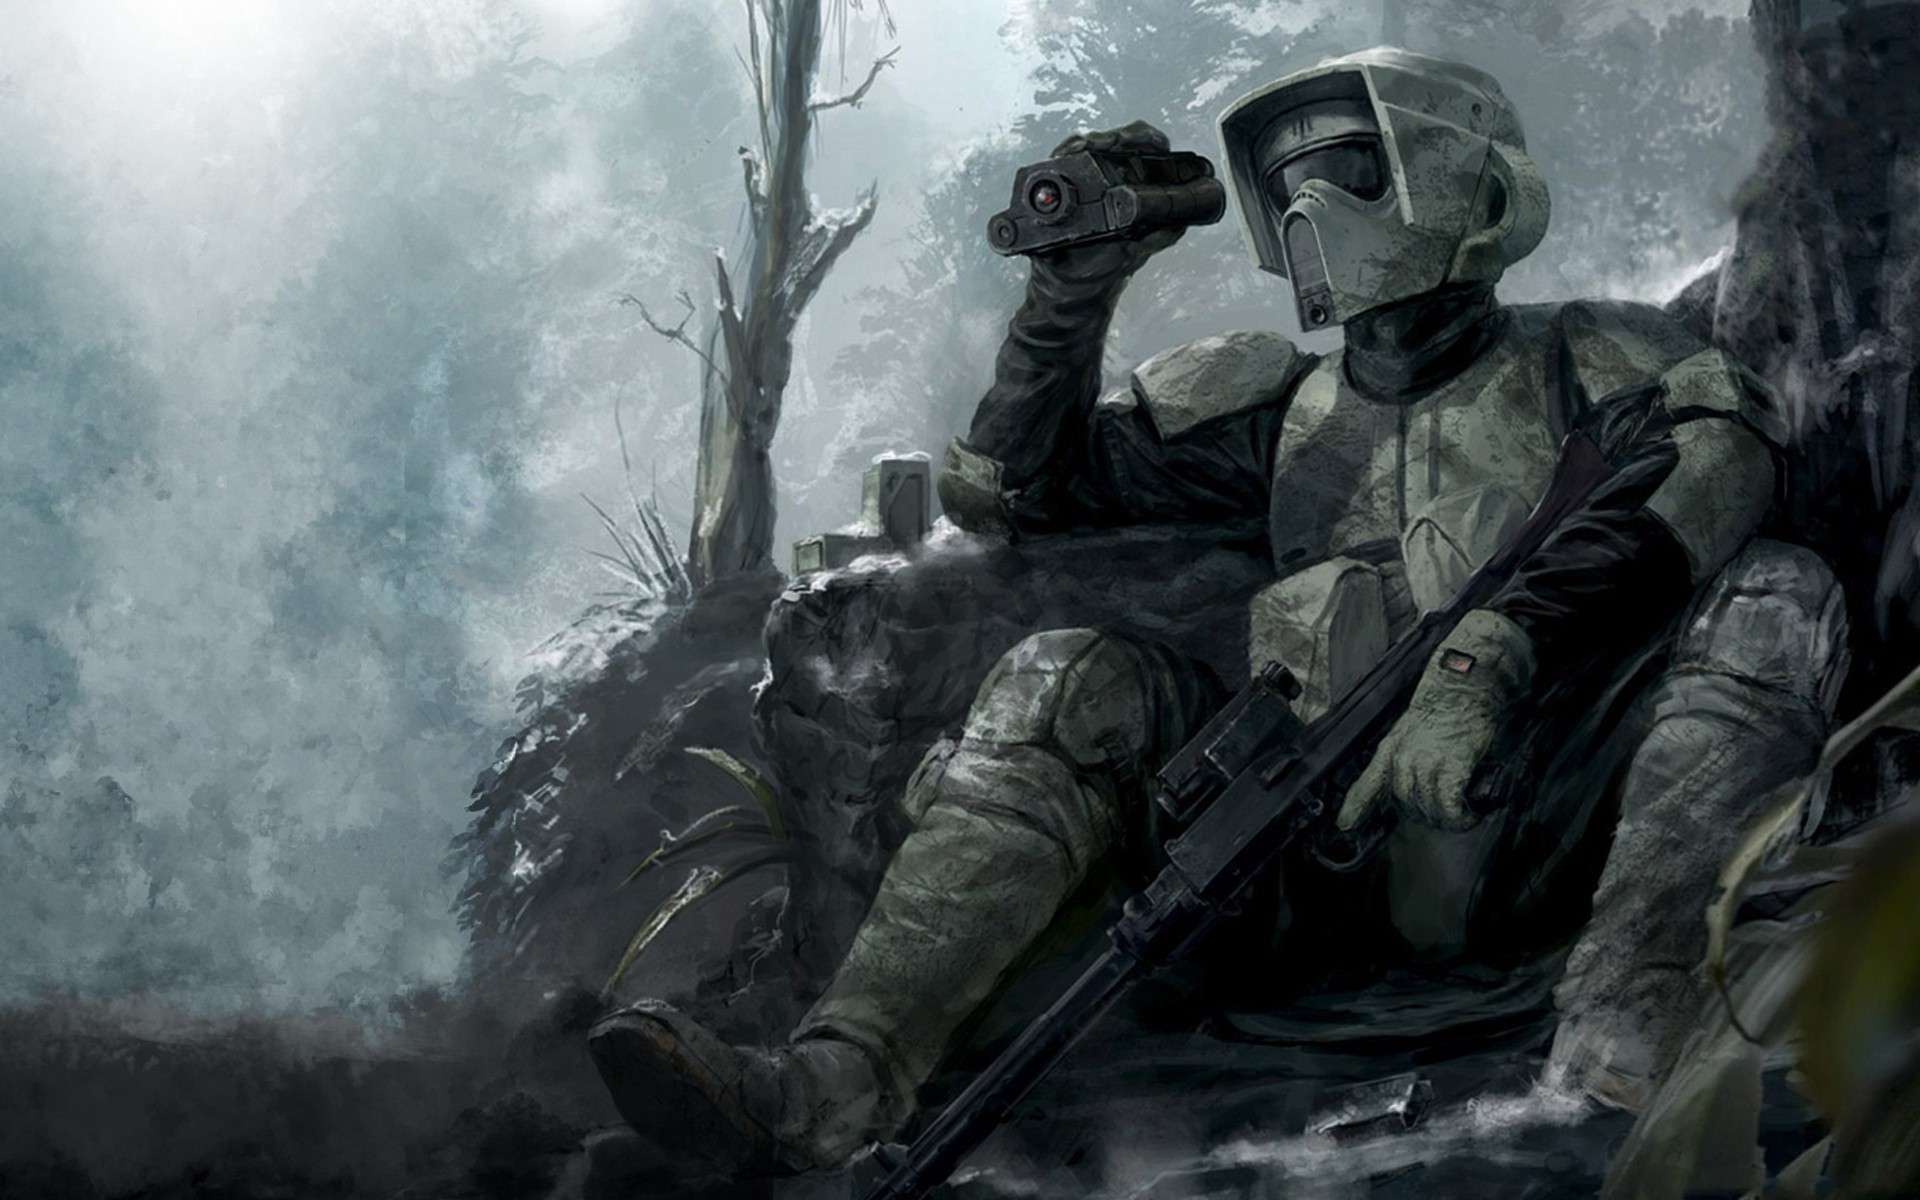 Star Wars Imperial Forces Scout Trooper Science Fiction Soldier Artwork Sniper Rifle 1920x1200